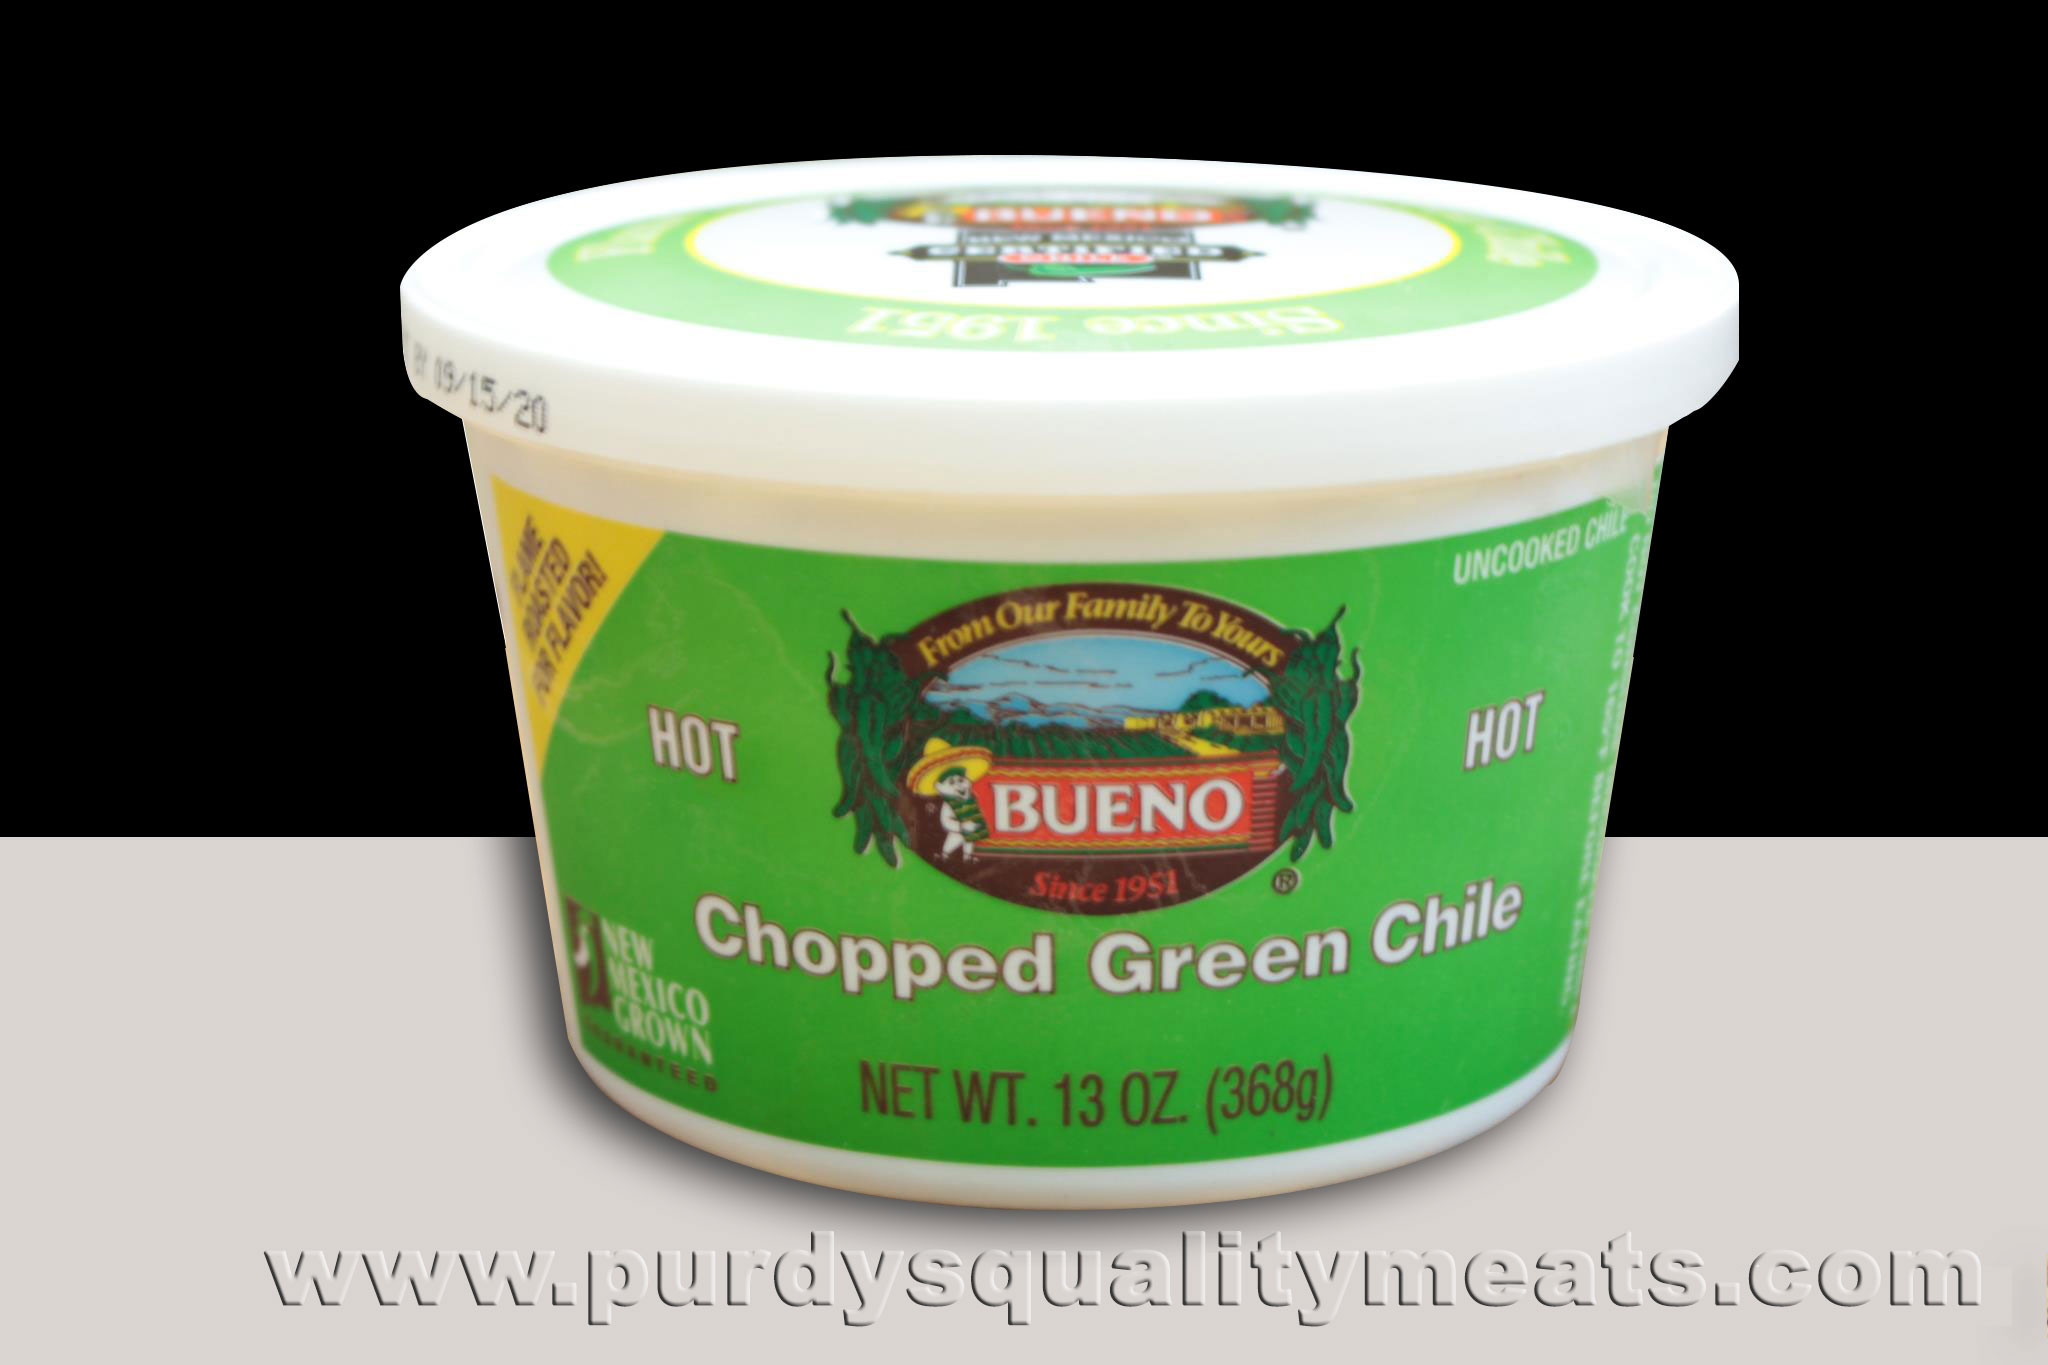 This image icon displays the Purdy's Quality Meats Chopped Green Chile image